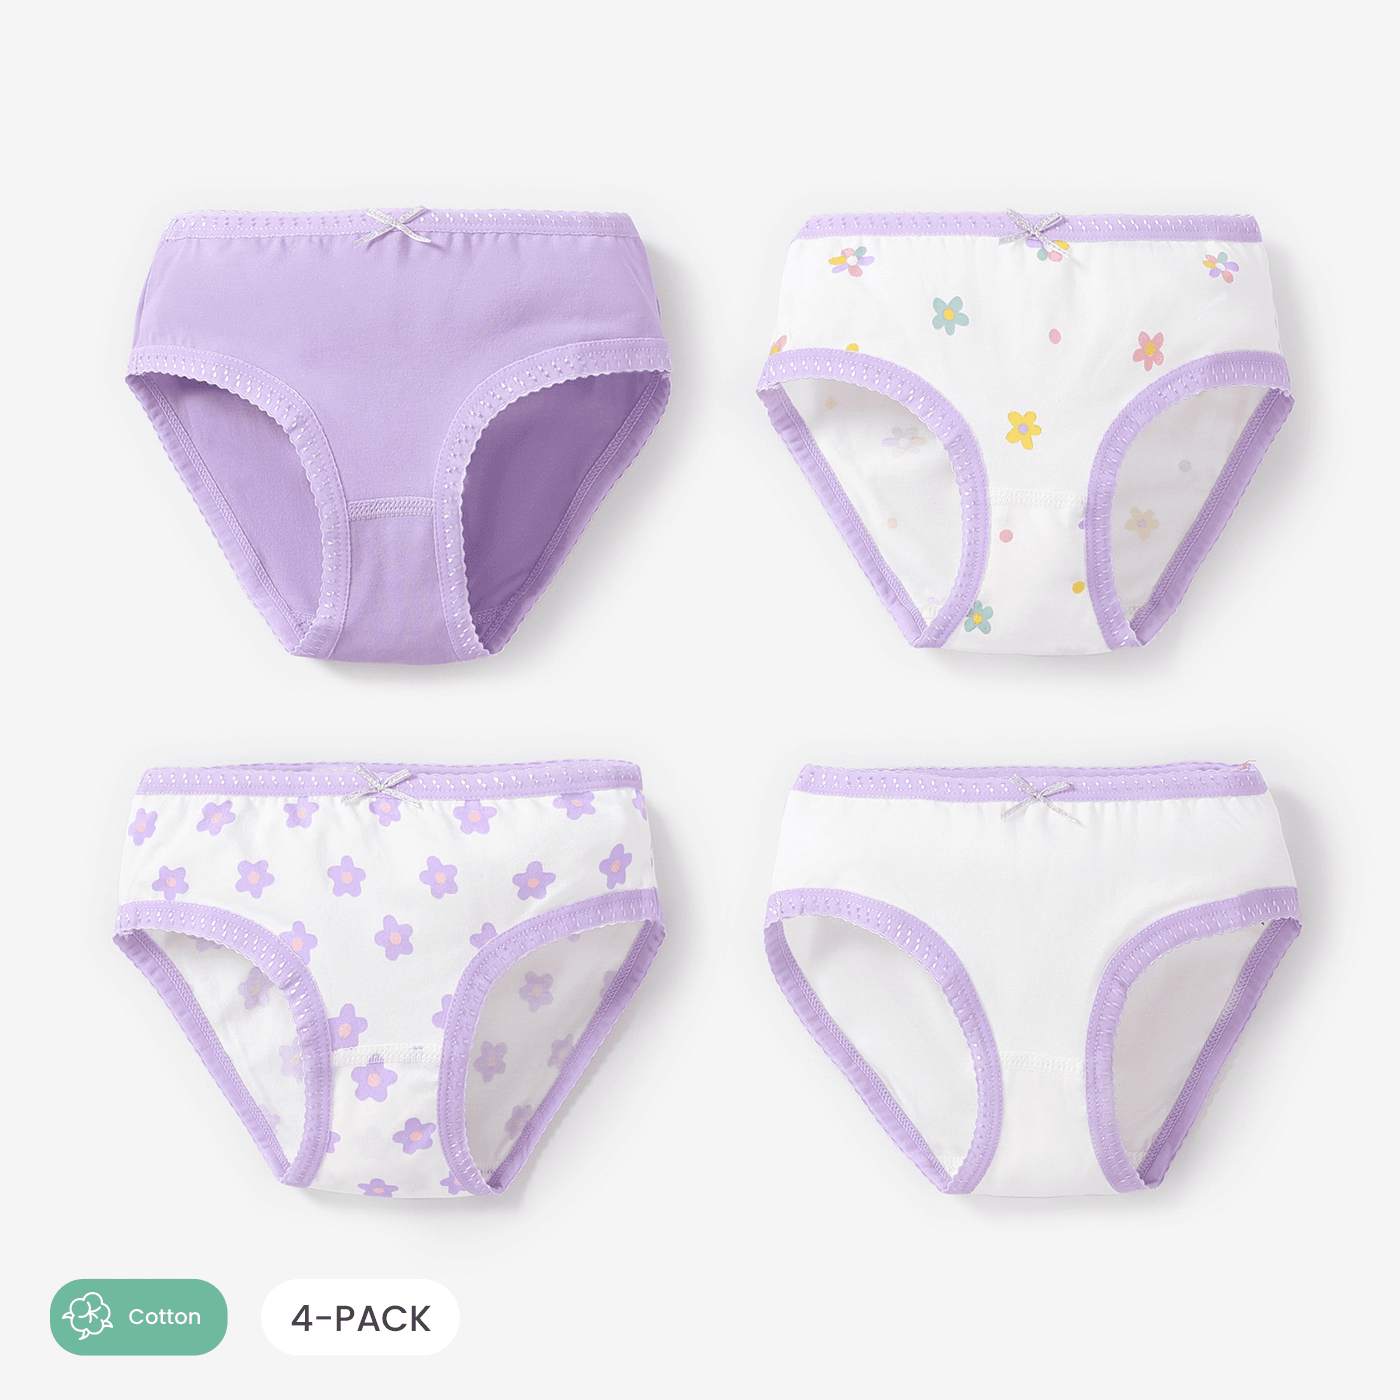 Girl's 4pcs Cotton Floral Underwear Set with Fabric Stitching - Casual Style